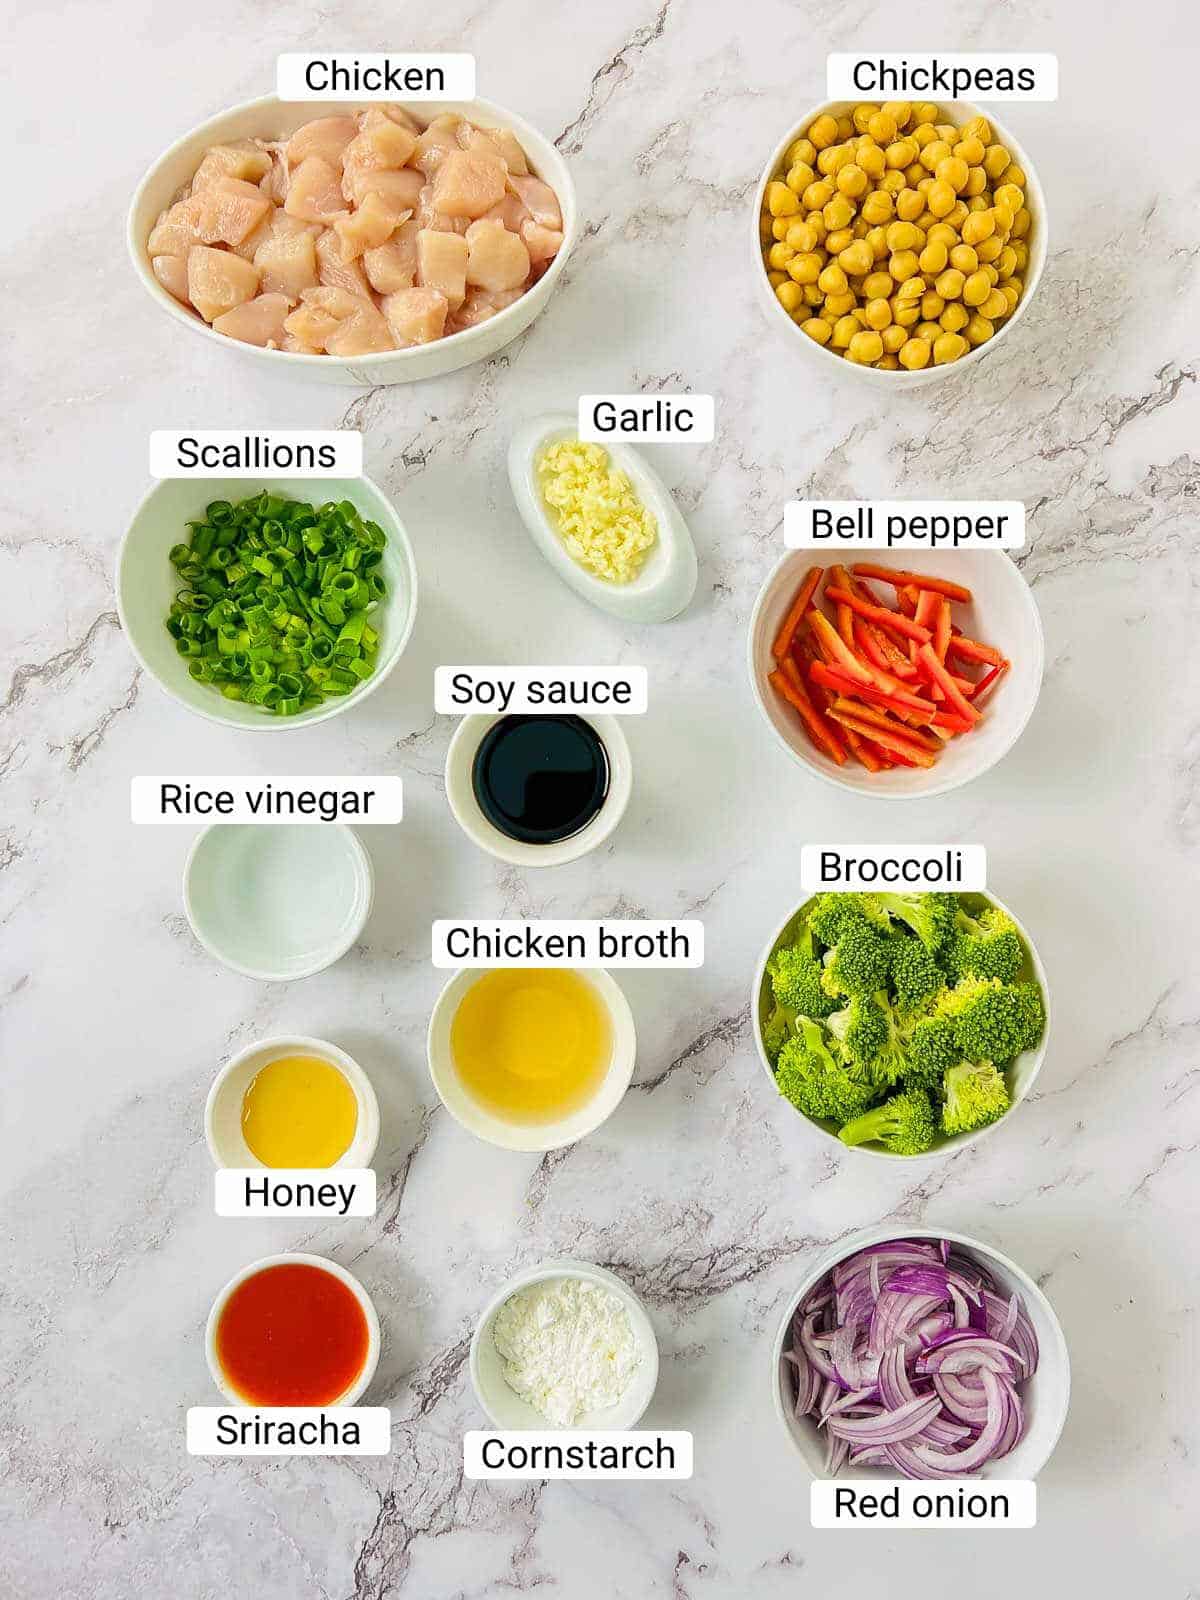 Ingredients to make chicken chickpeas stir fry on a white surface.